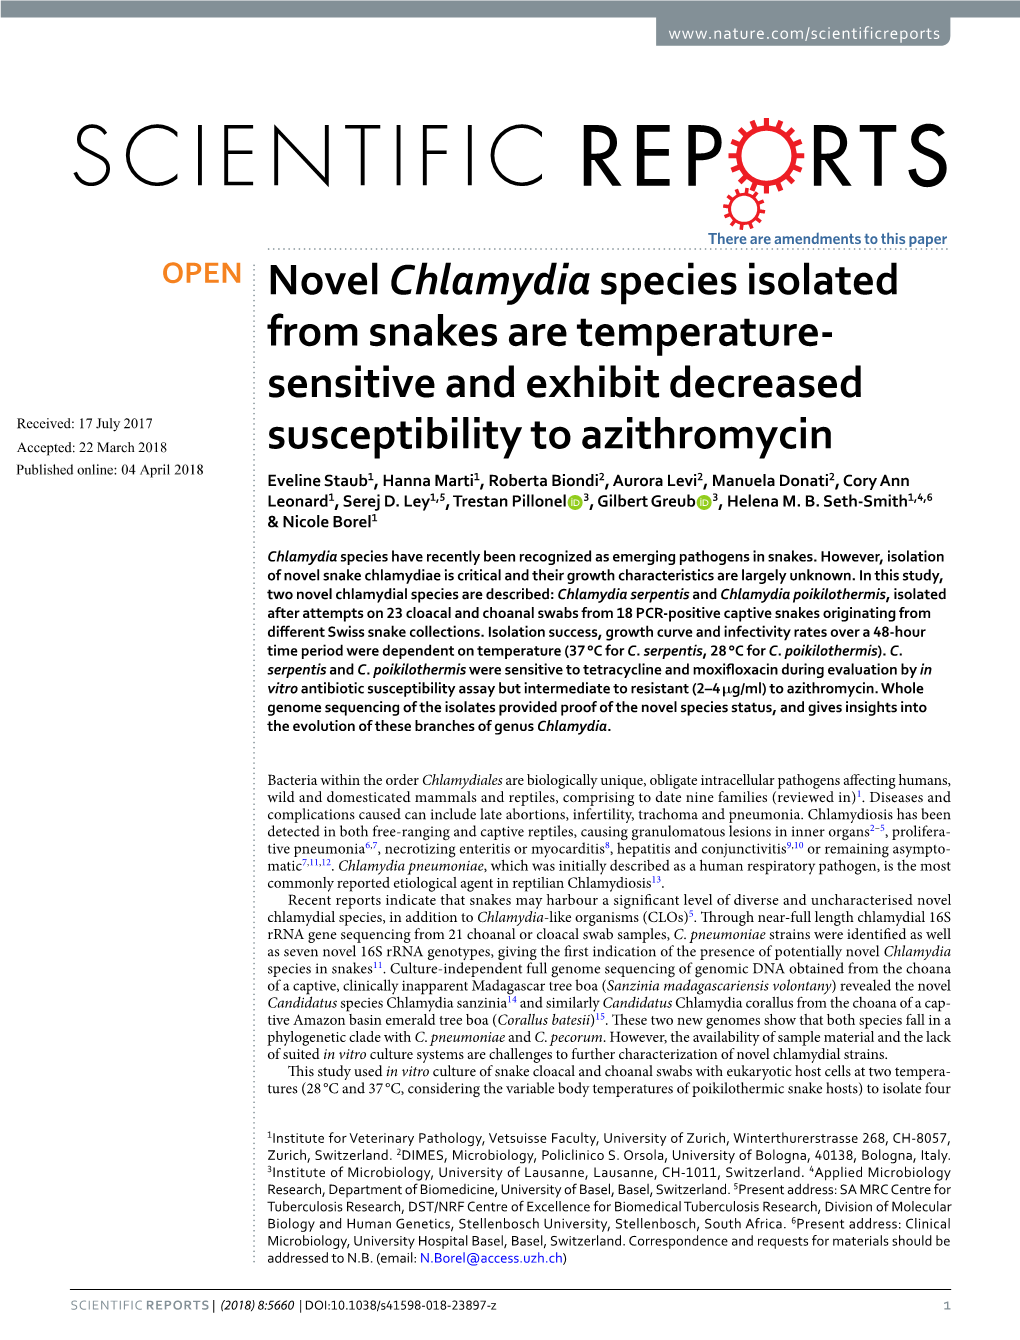 Novel Chlamydia Species Isolated from Snakes Are Temperature